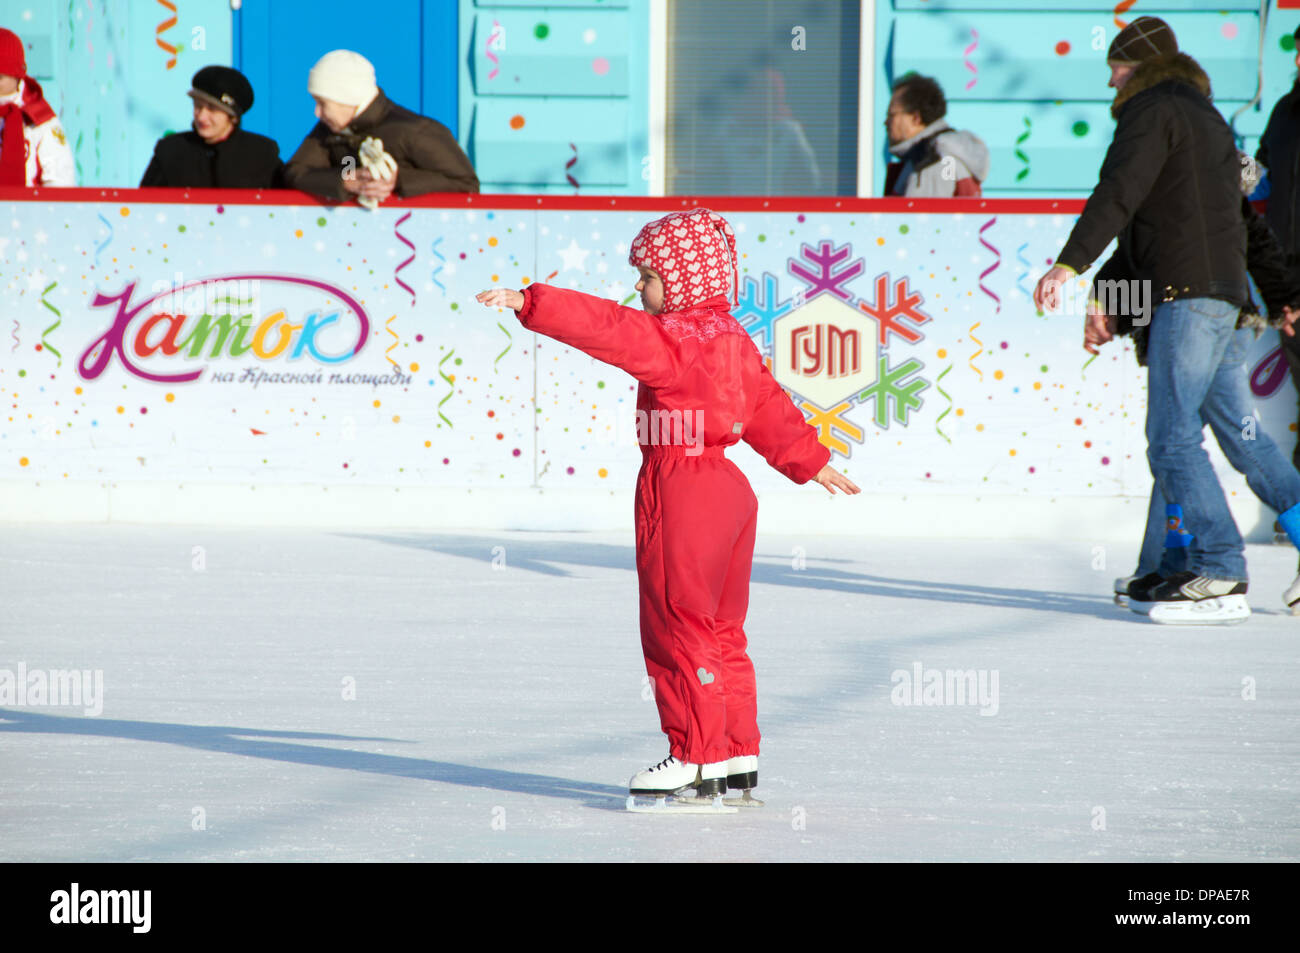 Russian skater on the Red Square ice rink Stock Photo